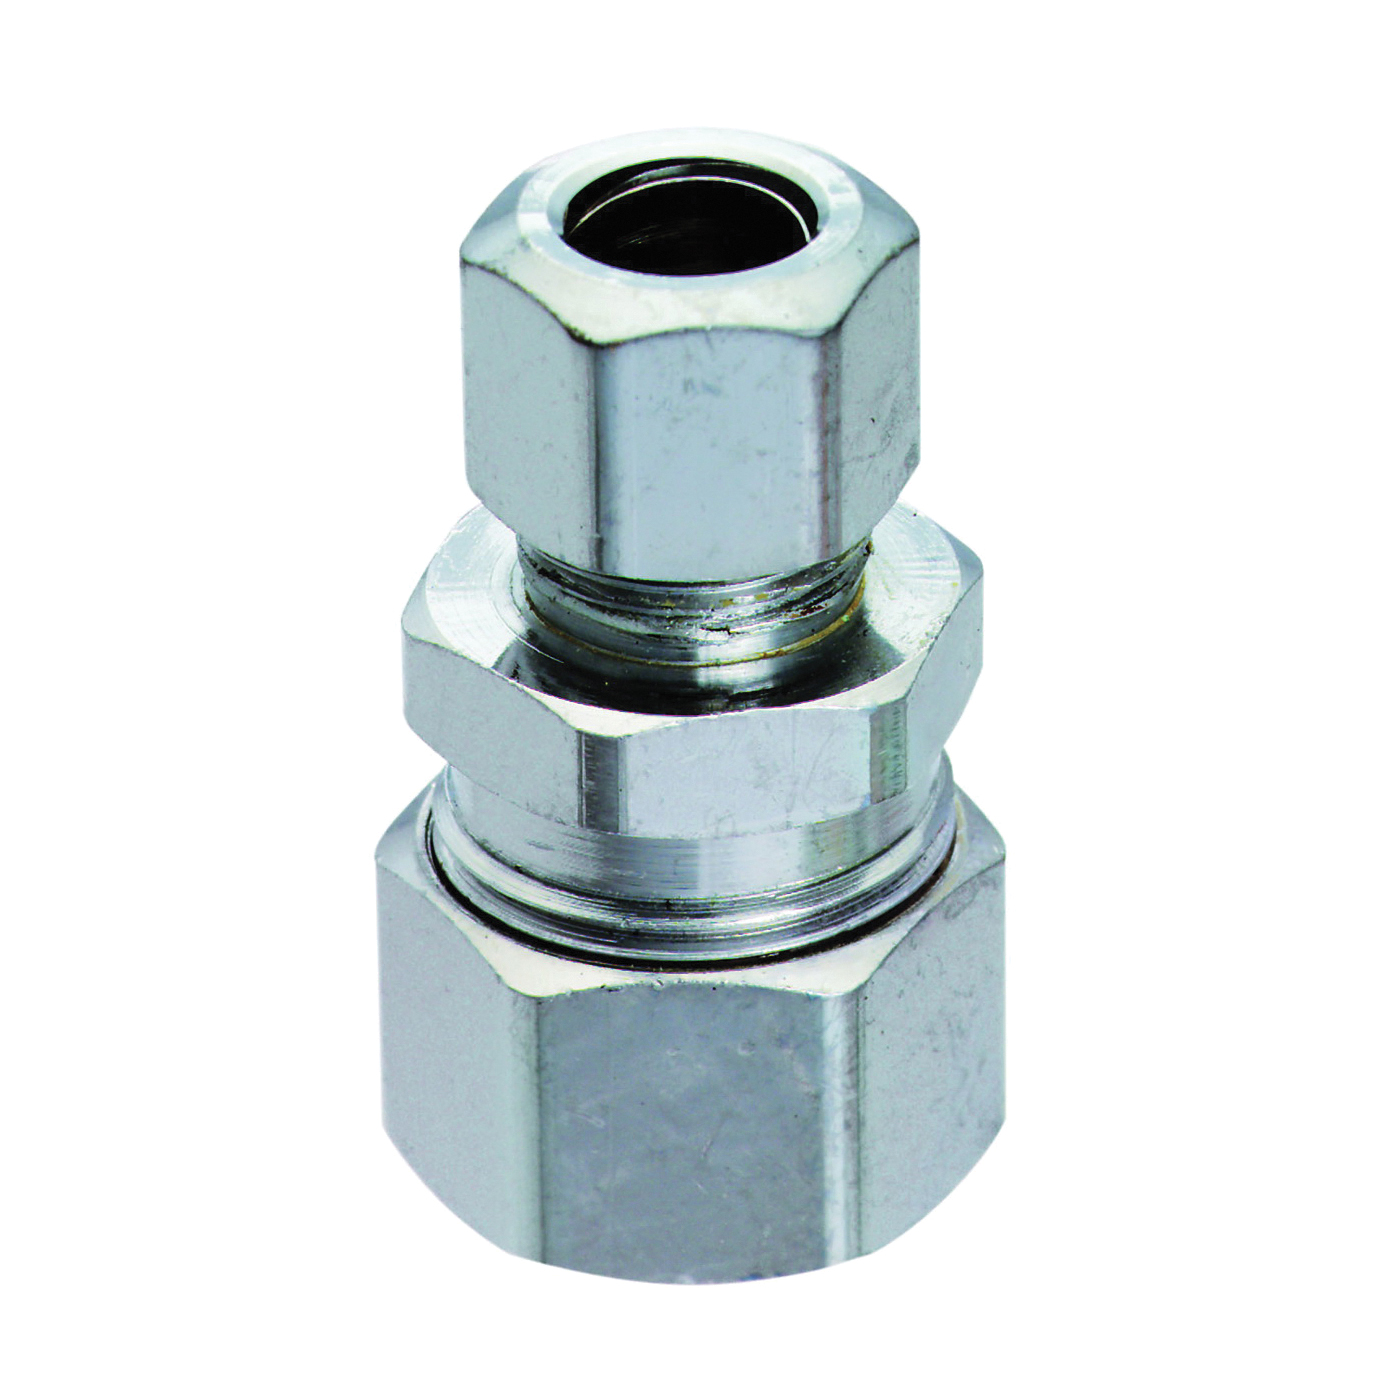 Plumb Pak PP80PCLF Tube Adapter, 5/8 x 3/8 in, Compression, Chrome